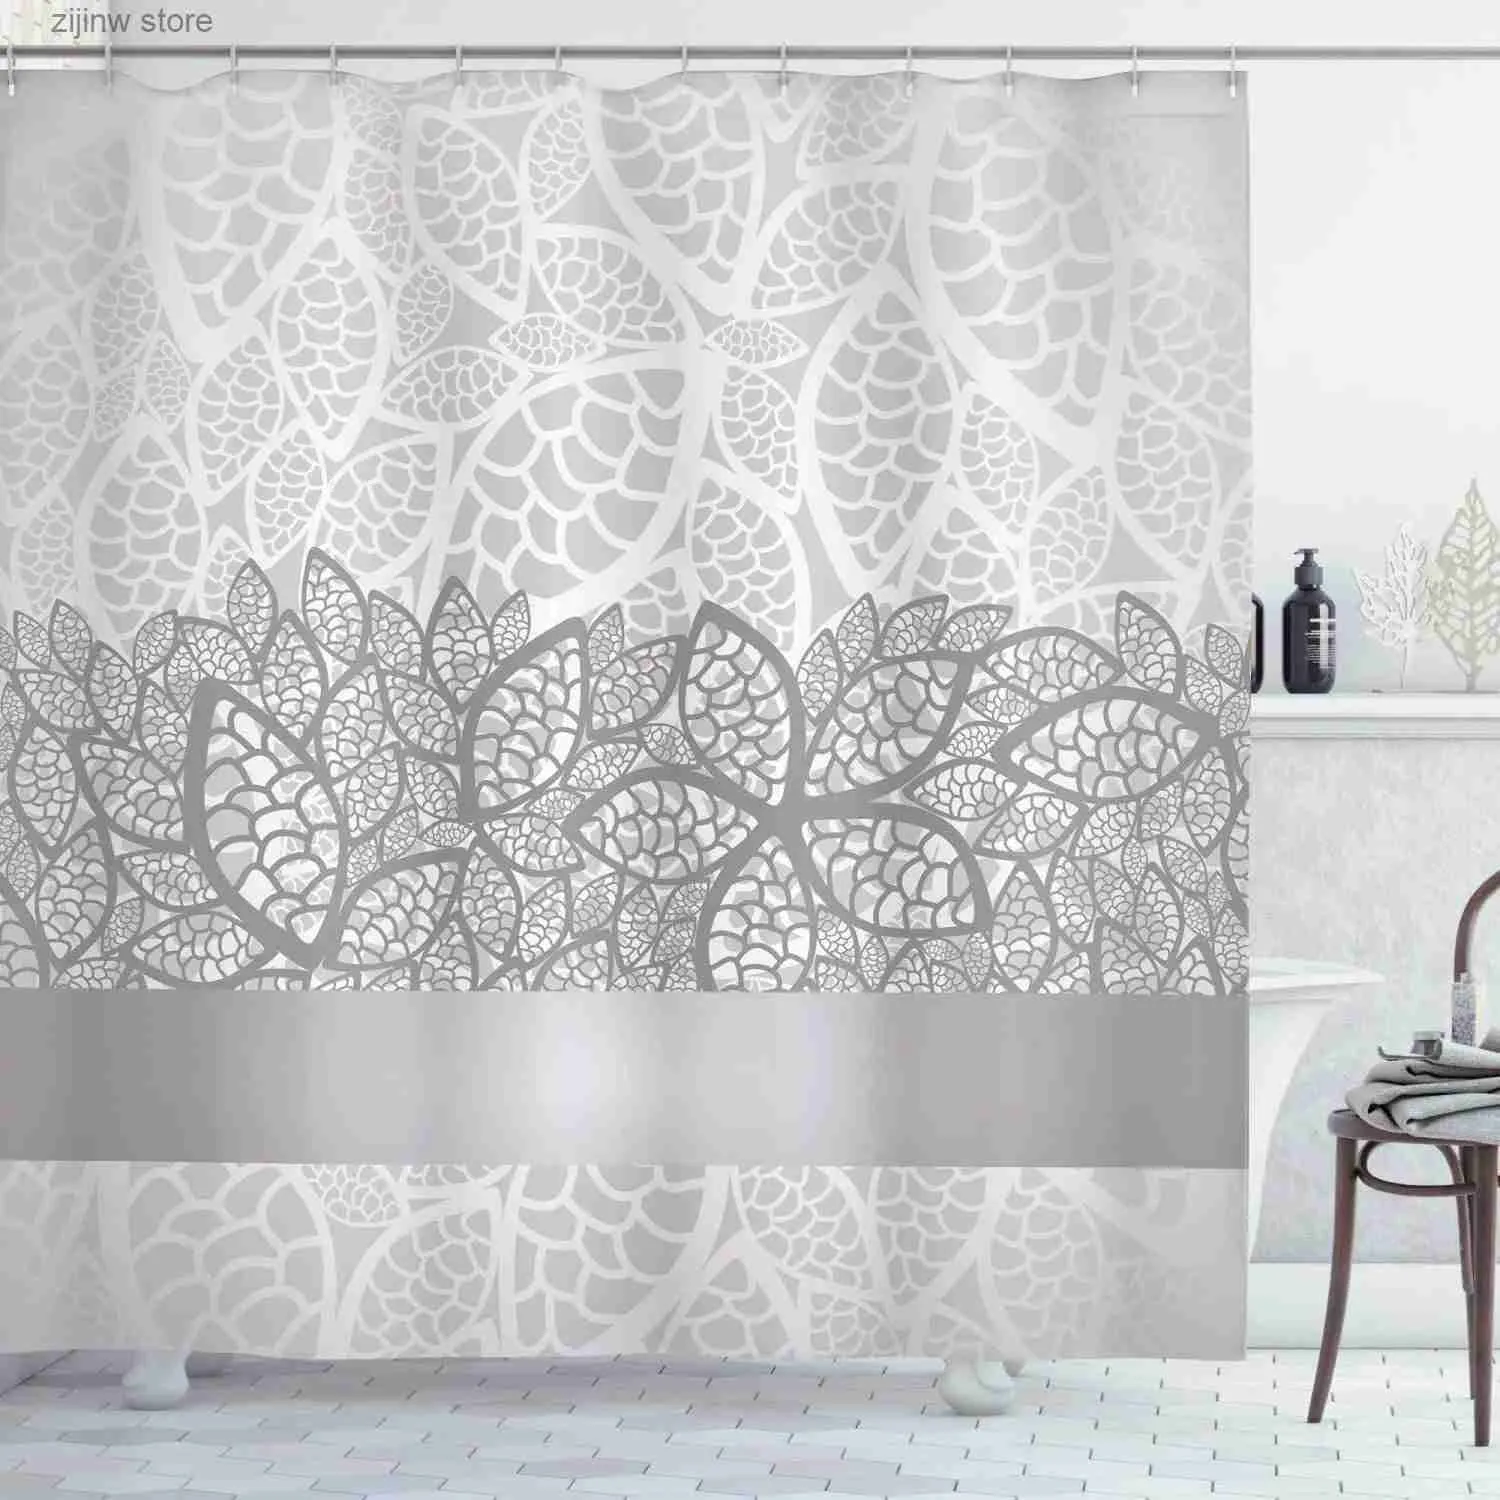 Shower Curtains Grey Floral Shower Curtains Lace Inspired Flower Modern Minimalist Ethnic Style Print Fabric Boho Bathroom Decor Sets with Hooks Y240316